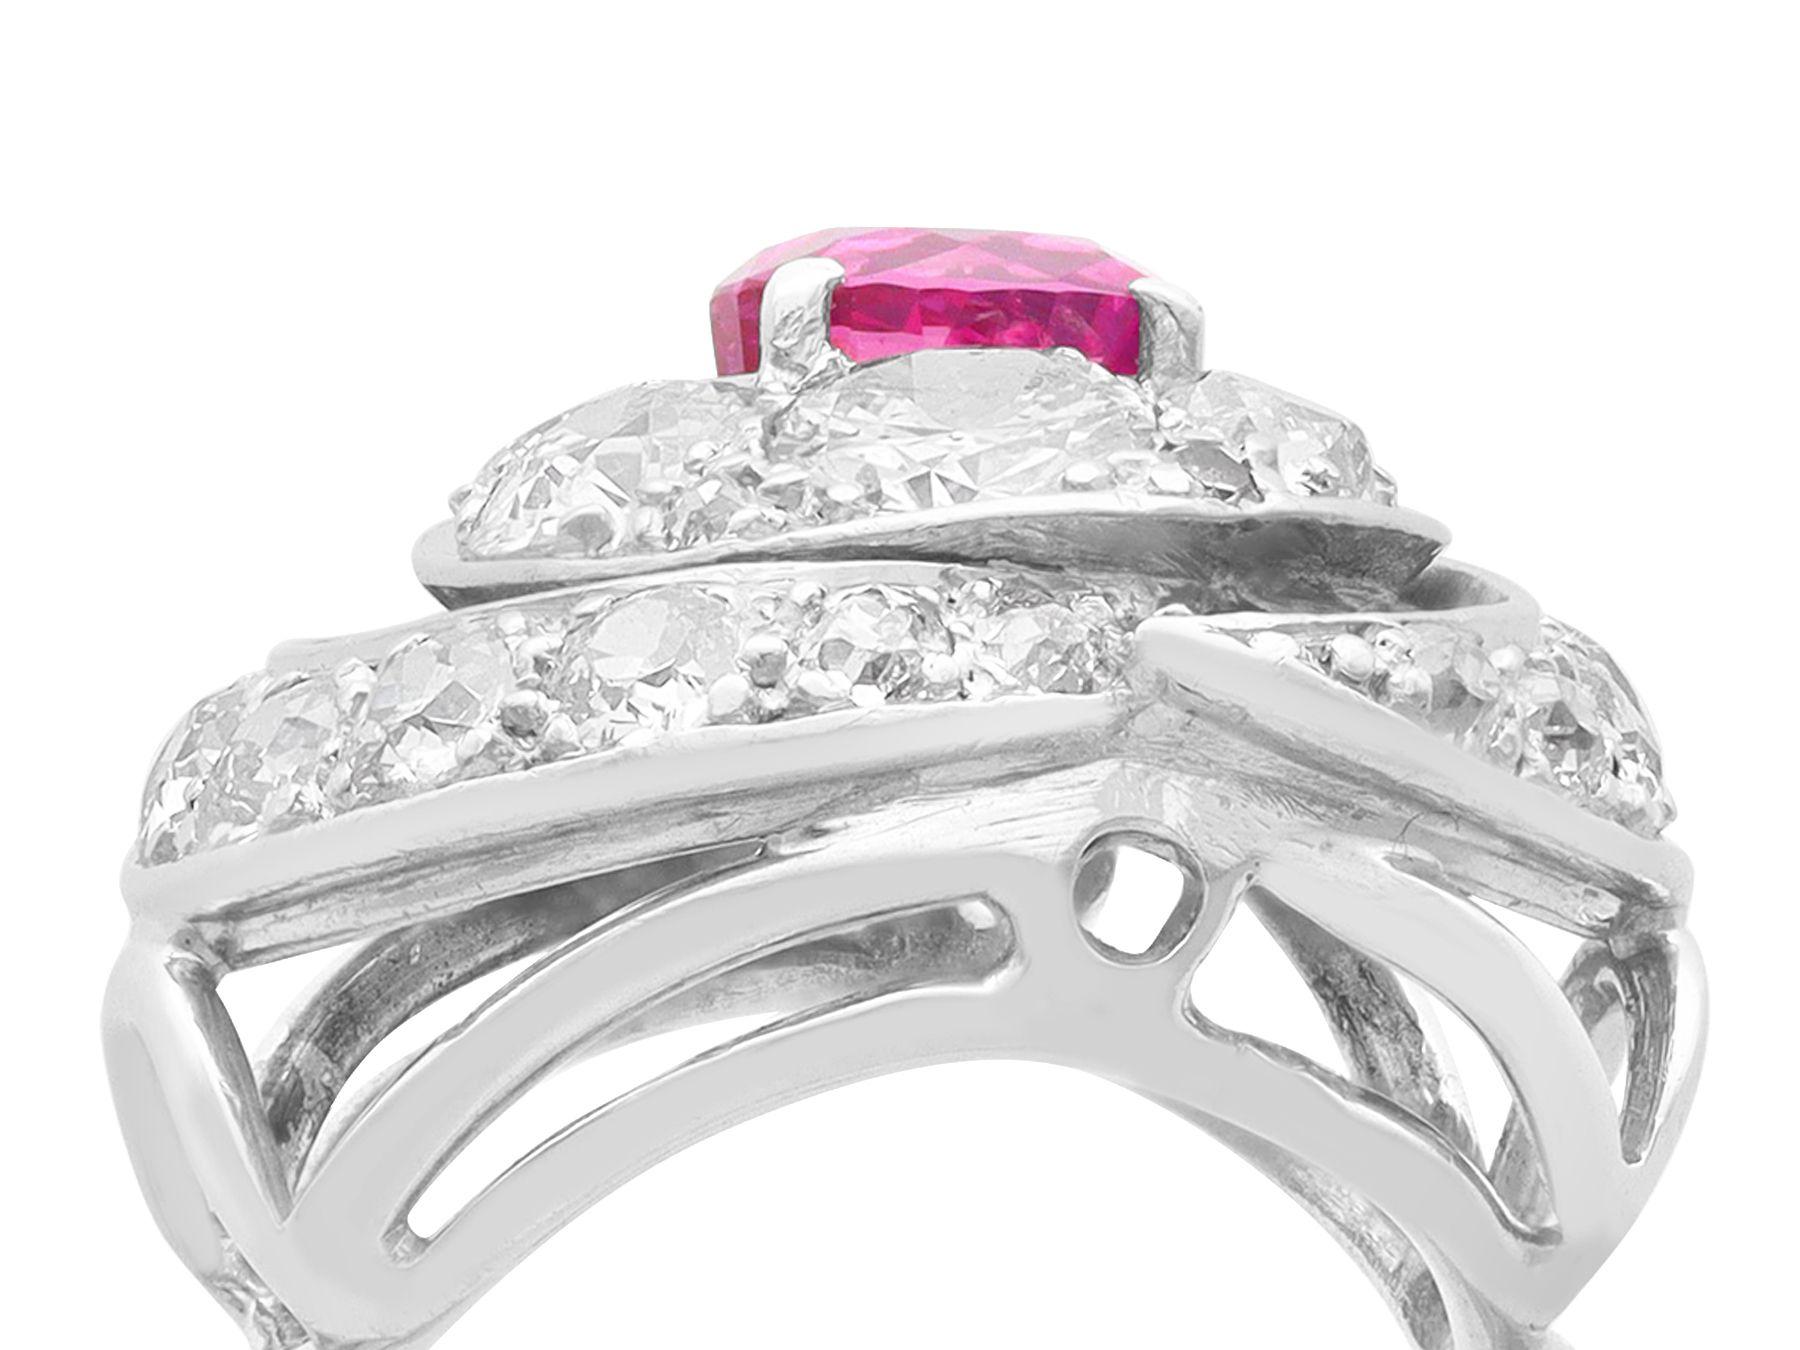 A stunning vintage 1.22 carat pink sapphire and 2.73 carat diamond, 18 karat white gold dress ring; part of our diverse vintage jewelry and estate jewelry collections

This fine and impressive vintage sapphire and diamond ring has been crafted in